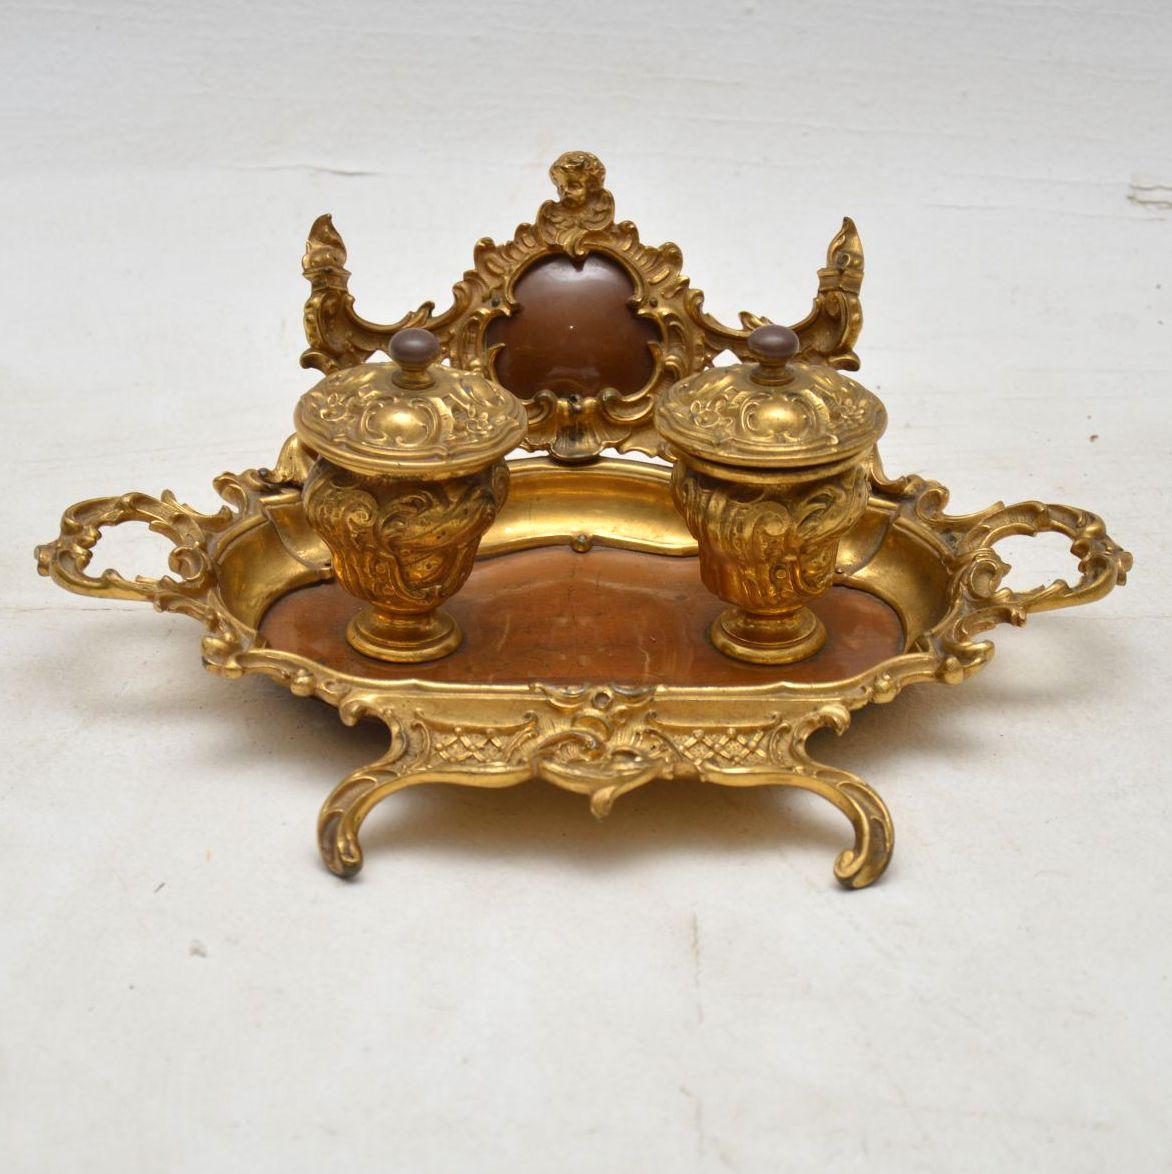 This French antique gilt bronze and polished wood inkwell stand has beautiful decoration all over and has some lovely features. Please enlarge all the images to see all the fine details. I would date this piece to circa 1860s-1880s period and it’s